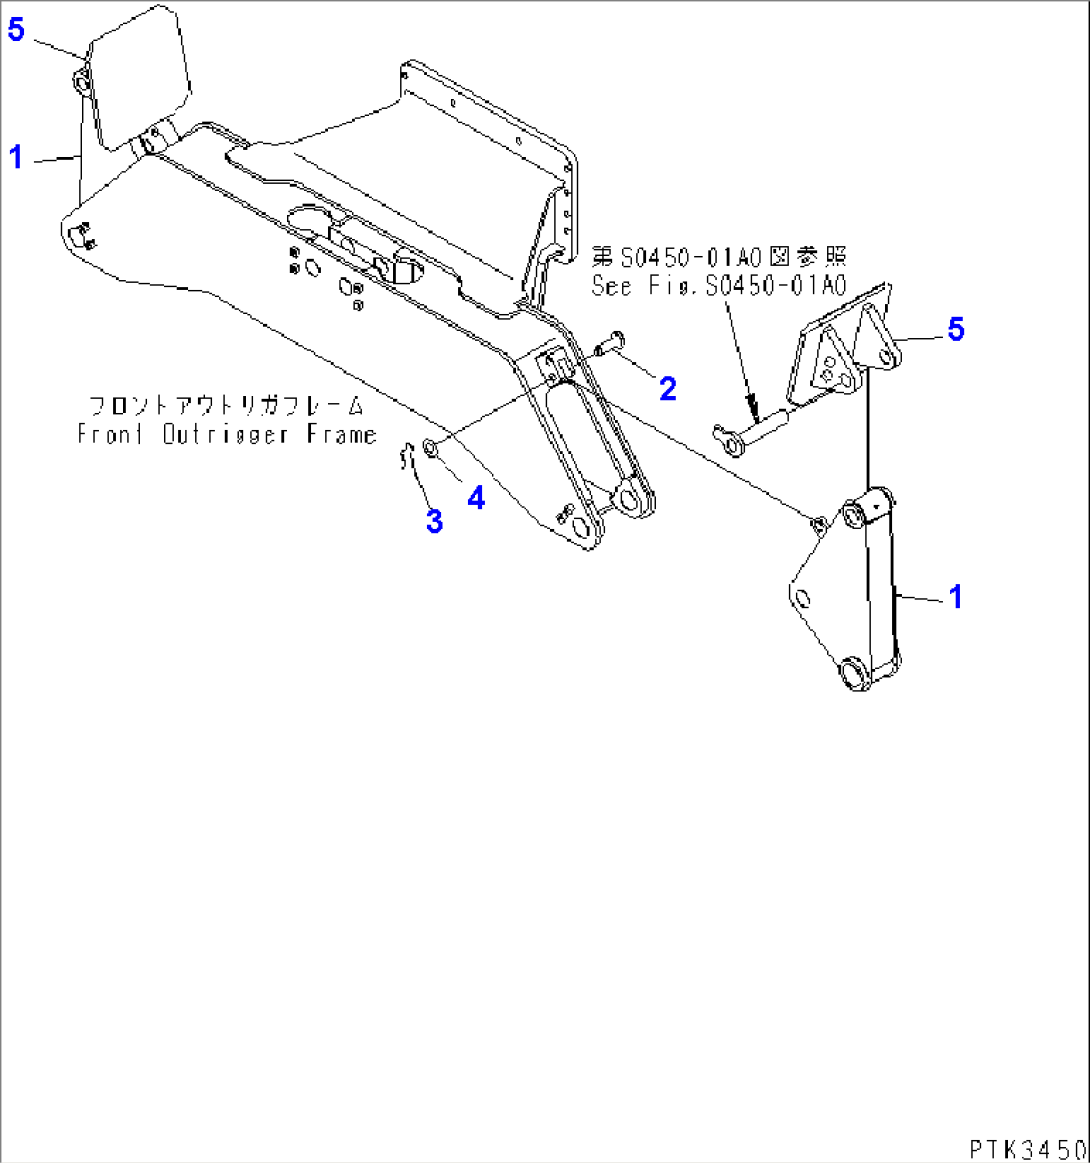 OUTRIGGER (LEG) (FOR FRONT OUTRIGGER)